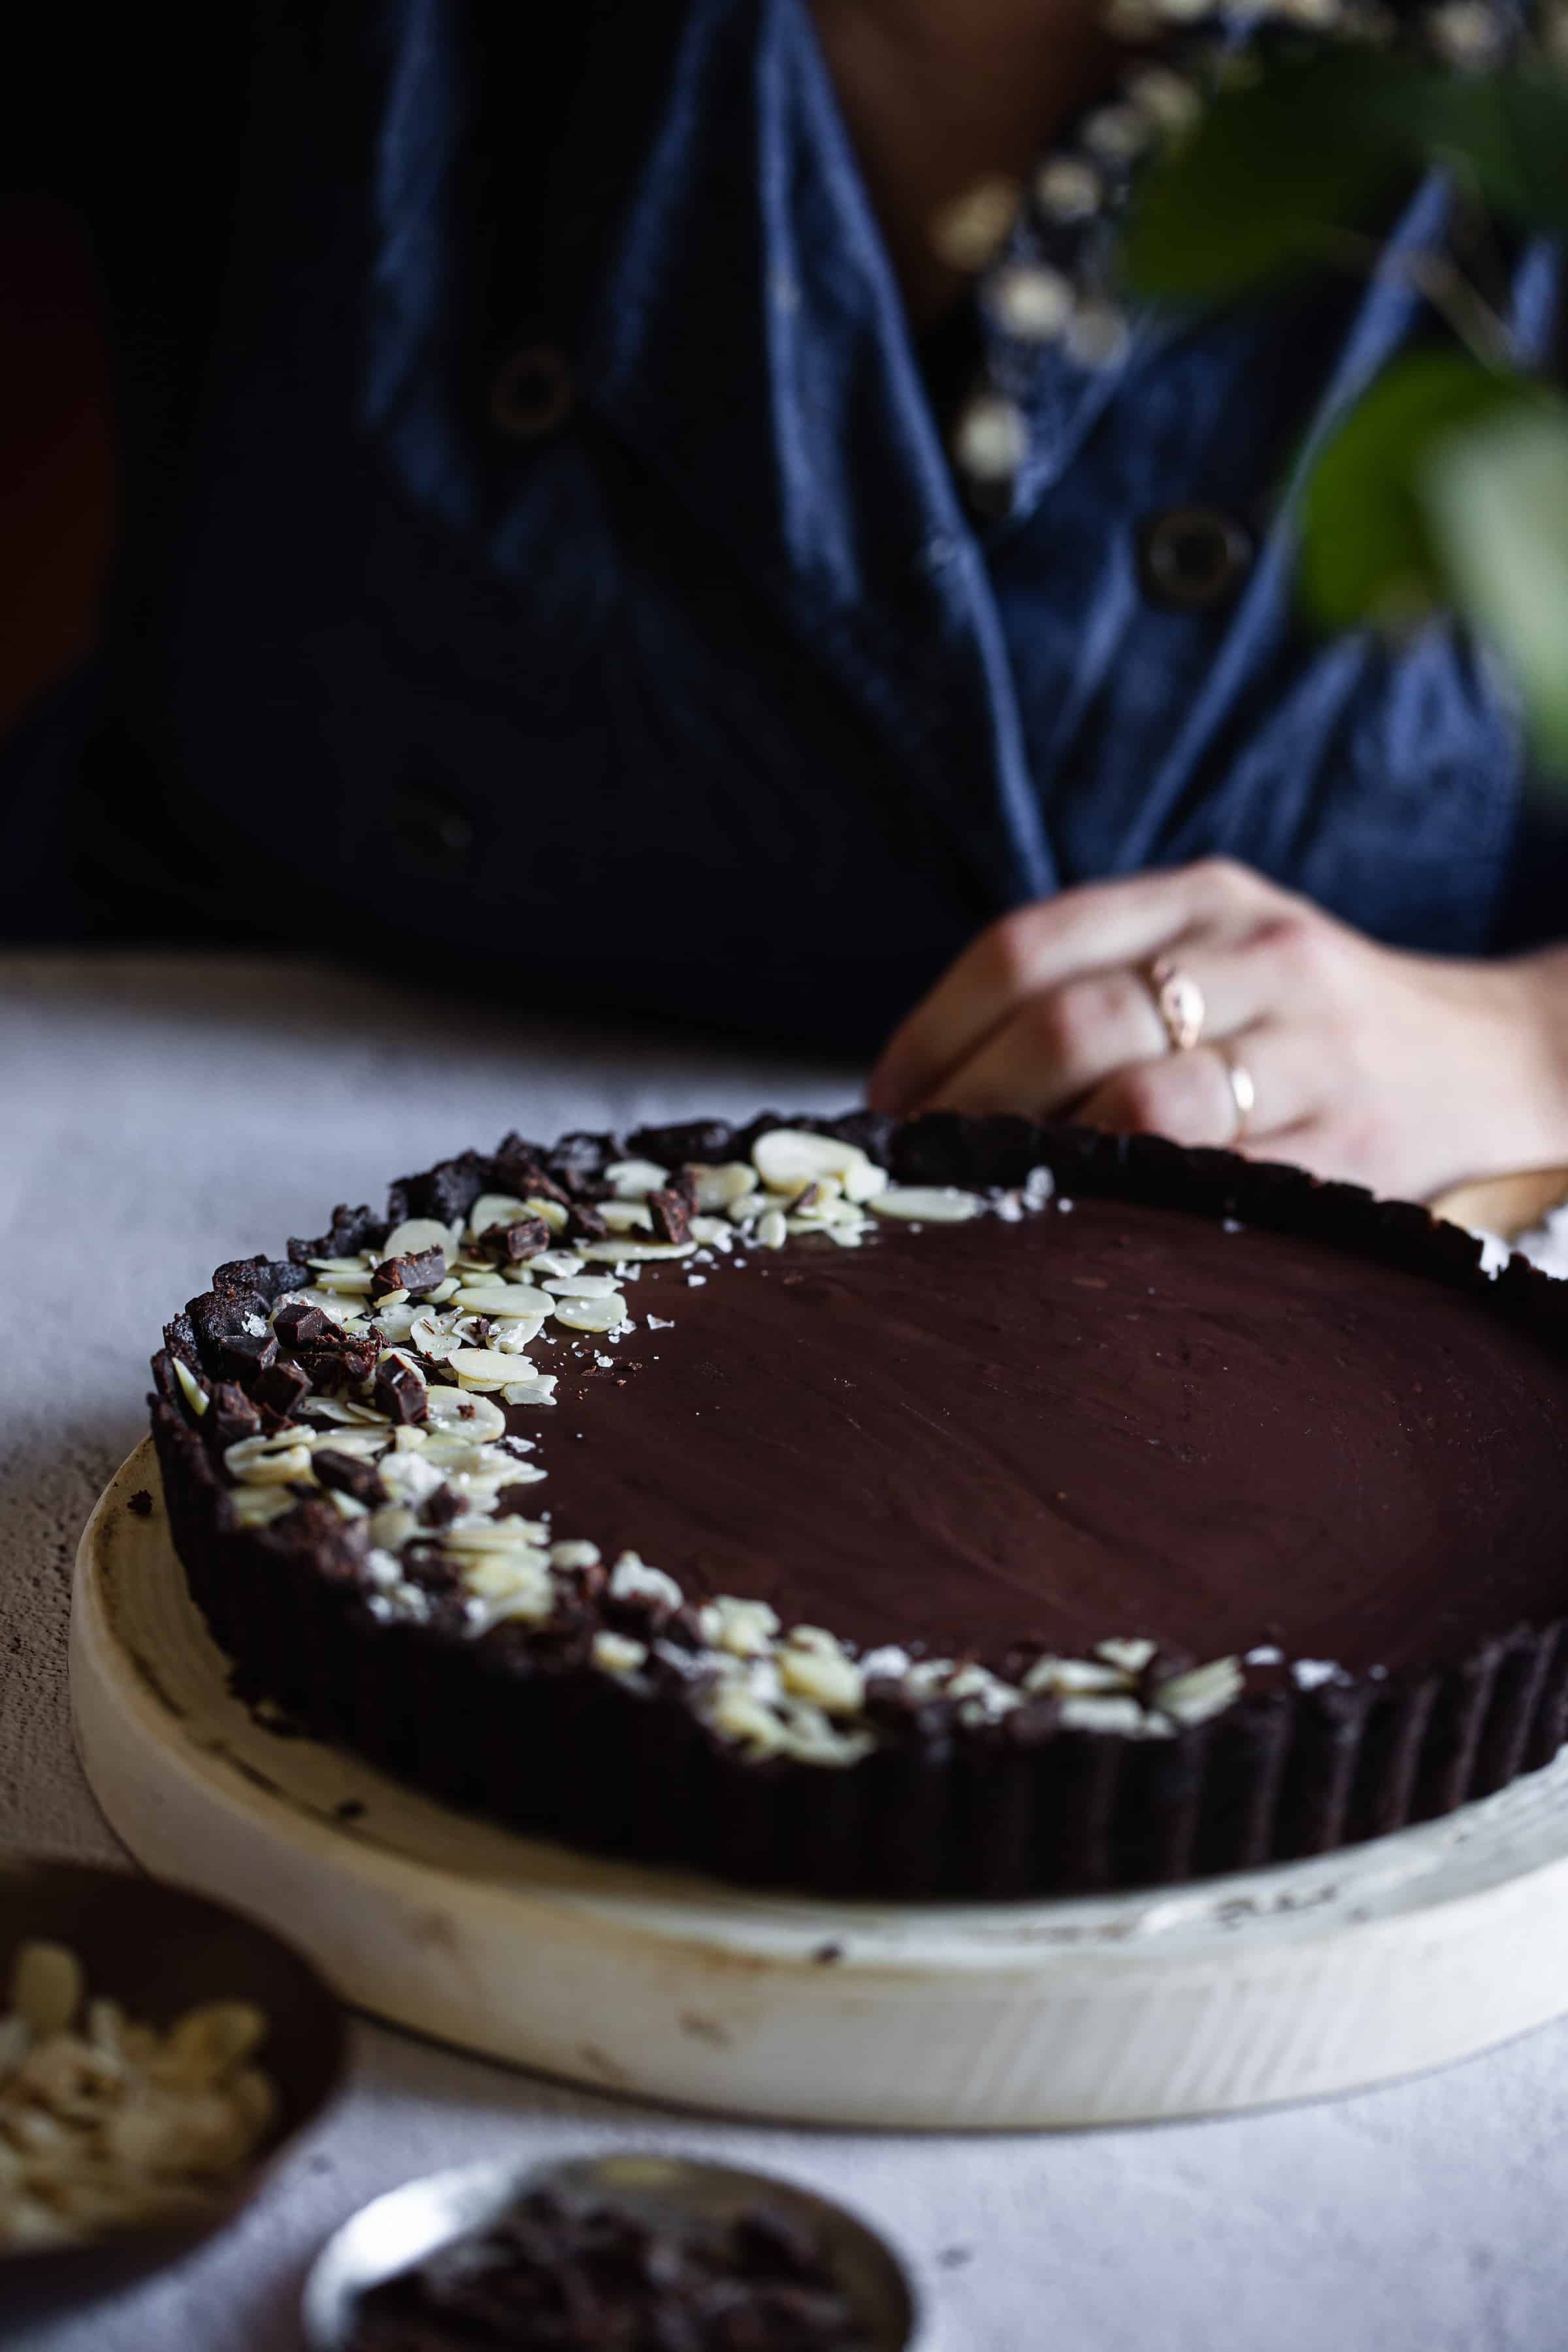 side view of chocolate tart on table with person in background